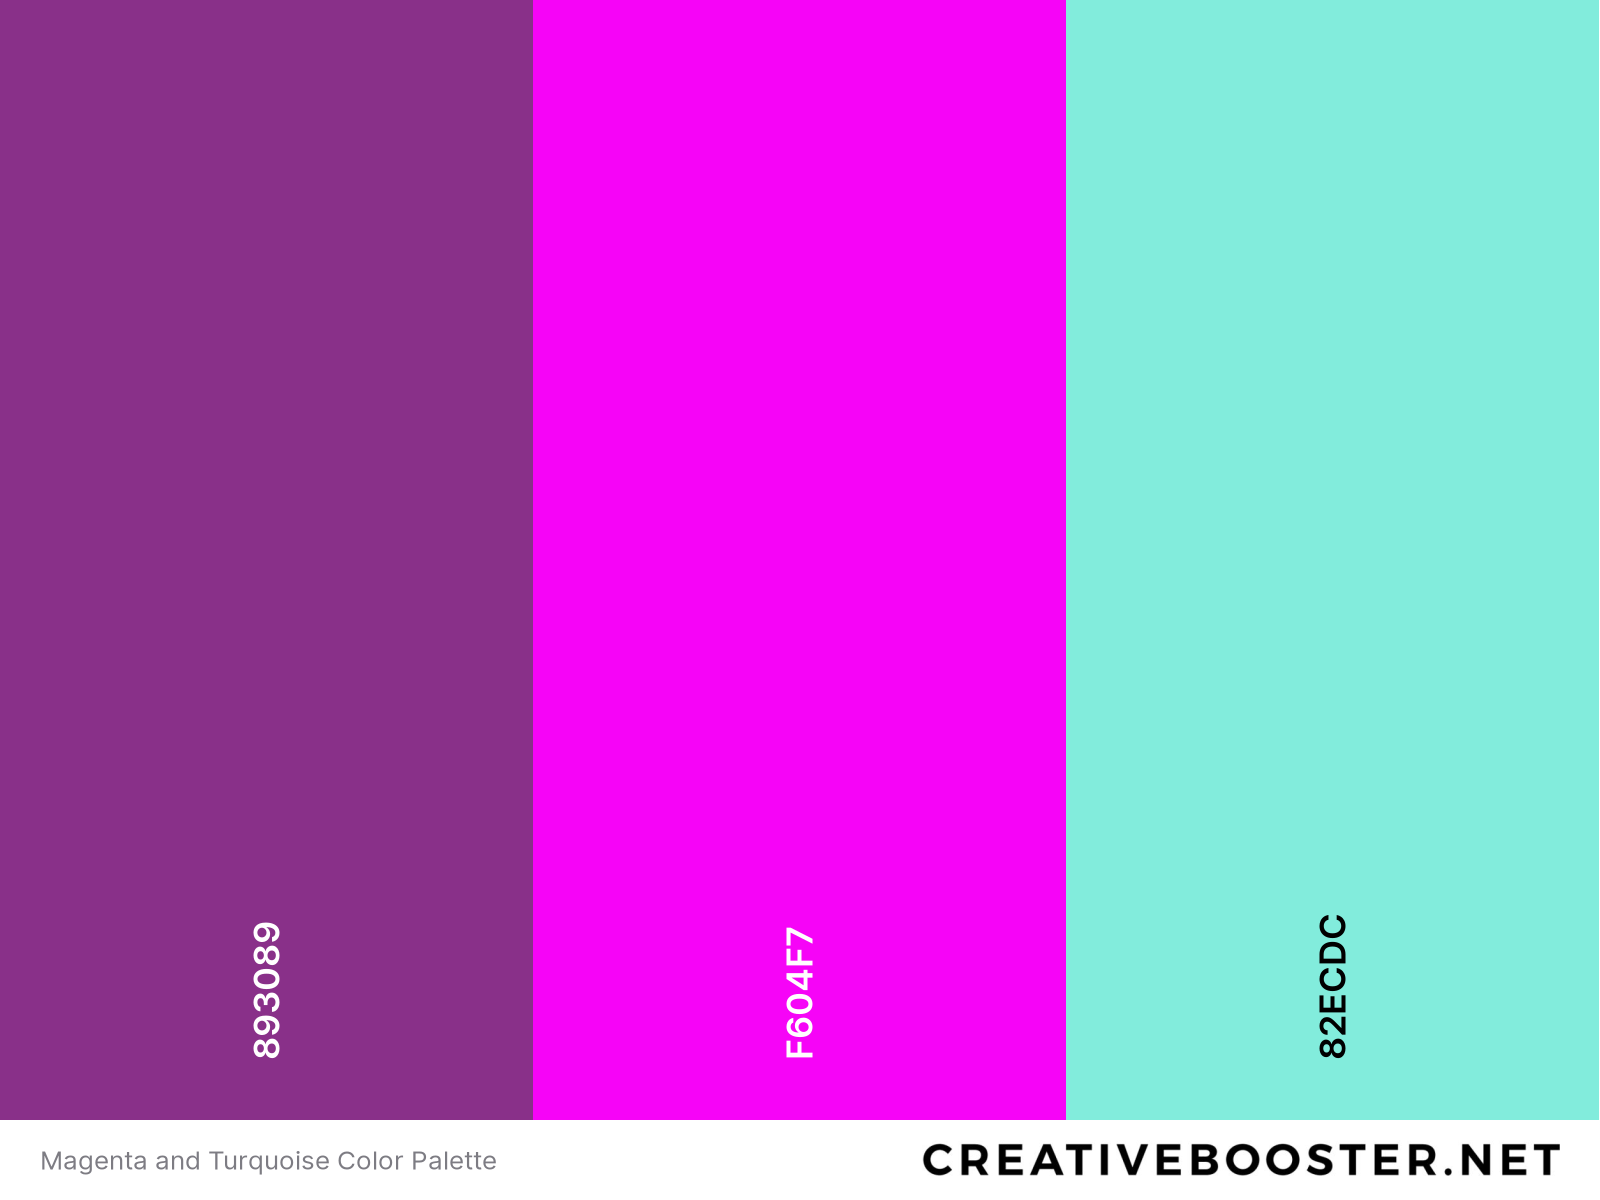 Magenta and Turquoise Color Palette